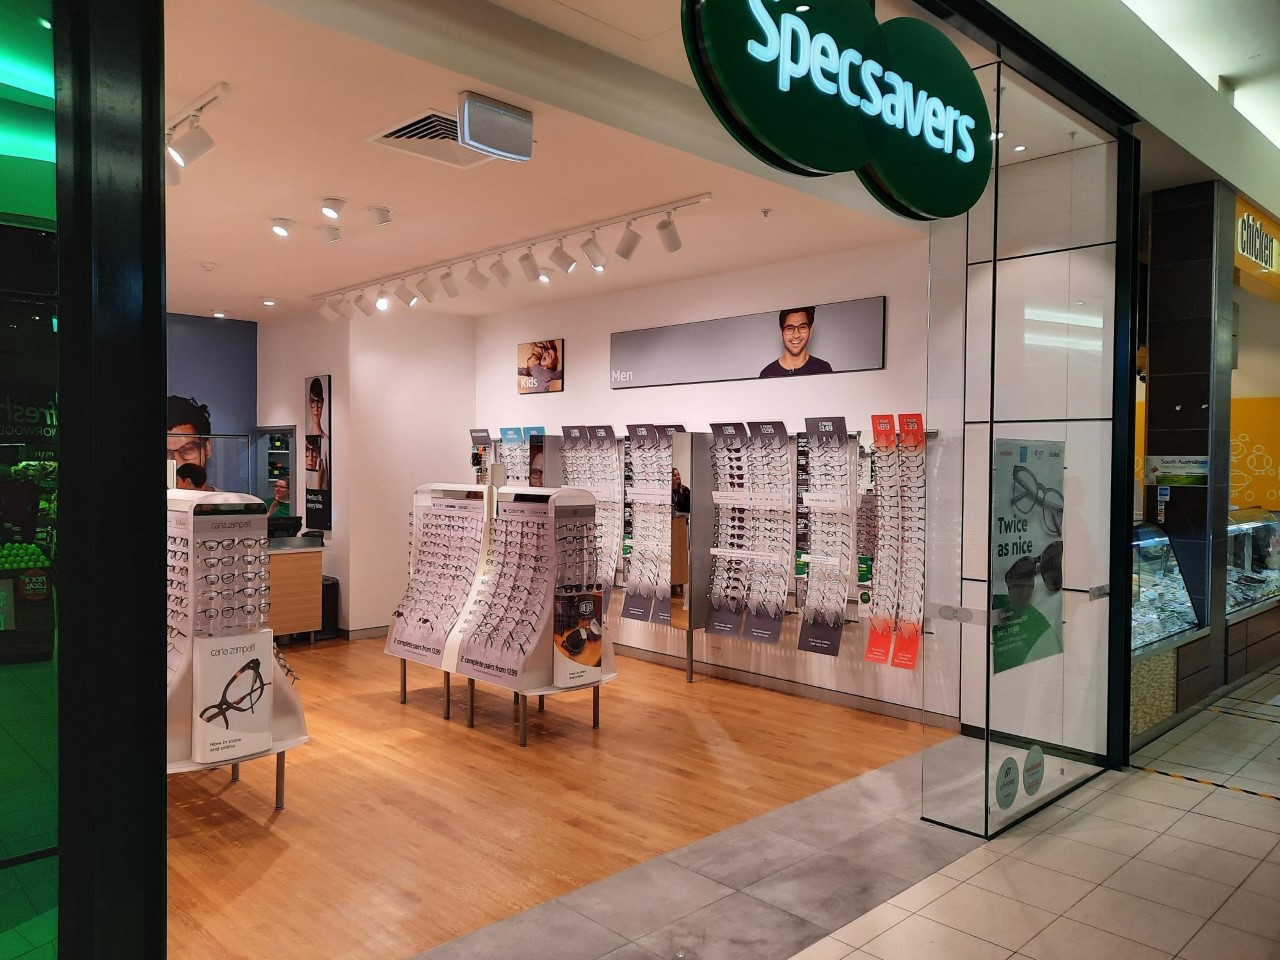 Images Specsavers Optometrists & Audiology - Norwood Place